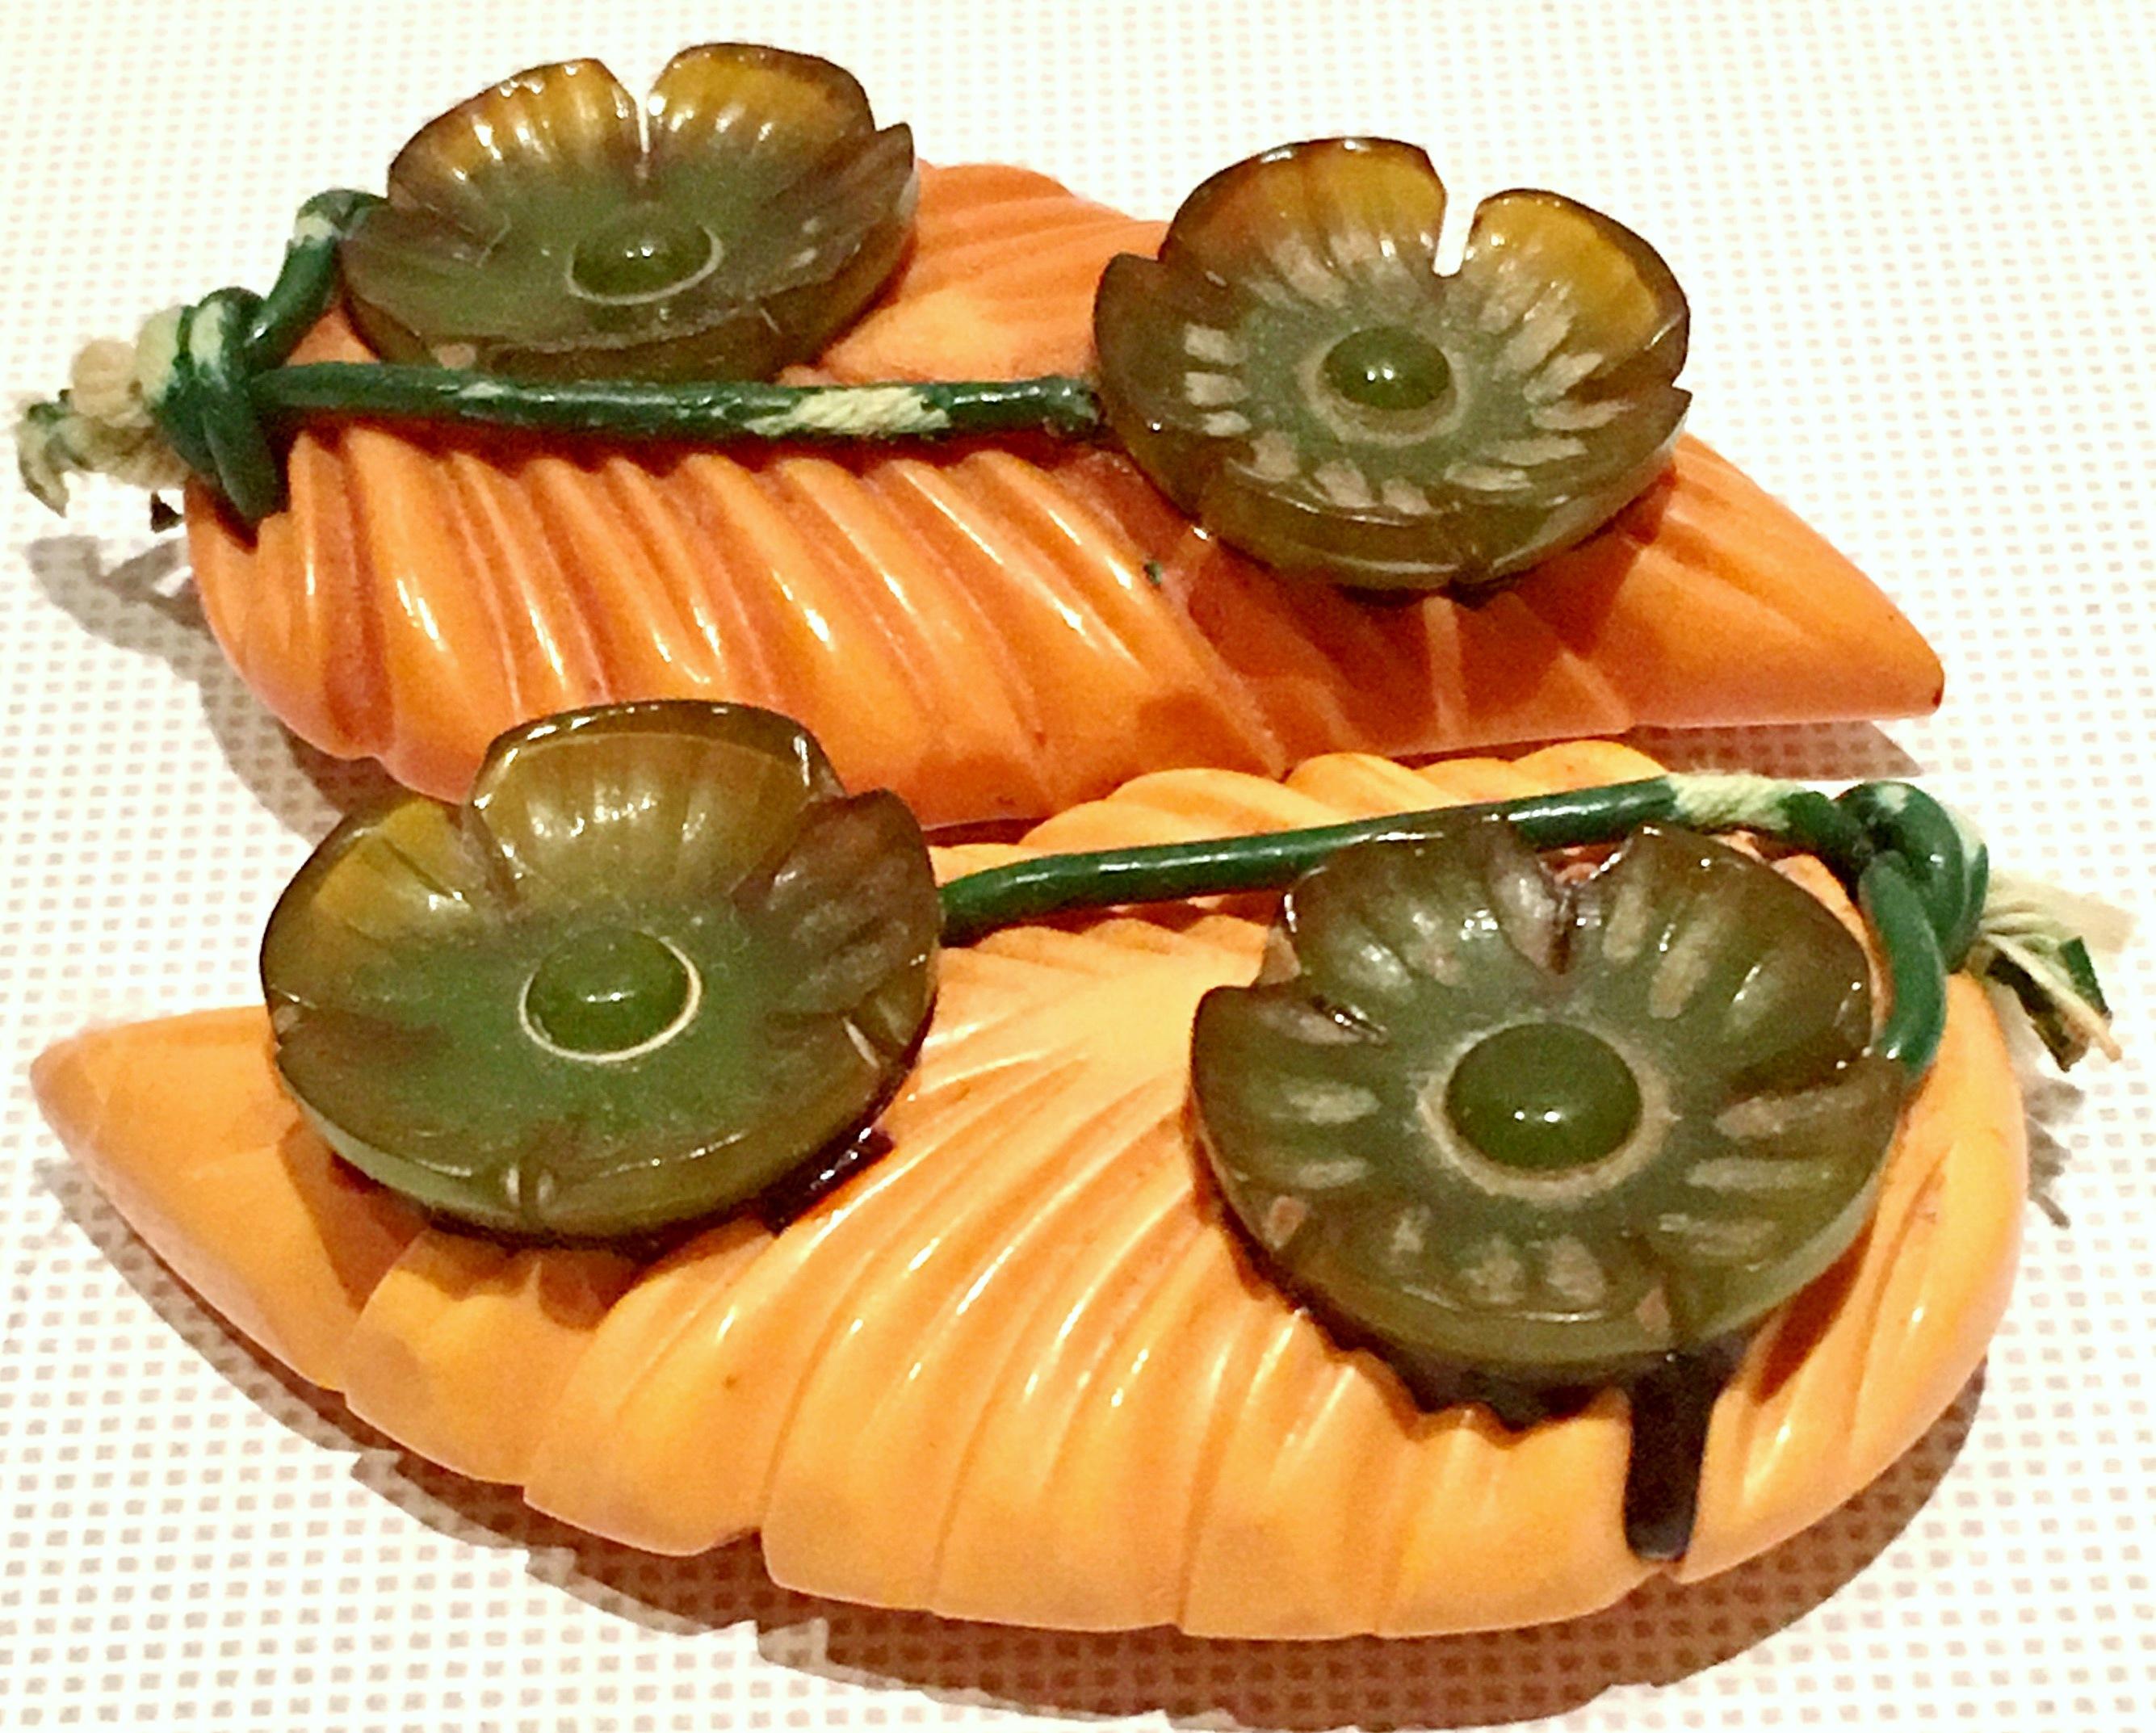 1930'S Pair Of Rare & Unique Bakelite Deeply Carved Dress Or Fur Clips. These studio art clips feature,  a combination of Bakelite butterscotch and green, deeply and intricately carved dimensional abstract leaf form motif. Can be used in a number of